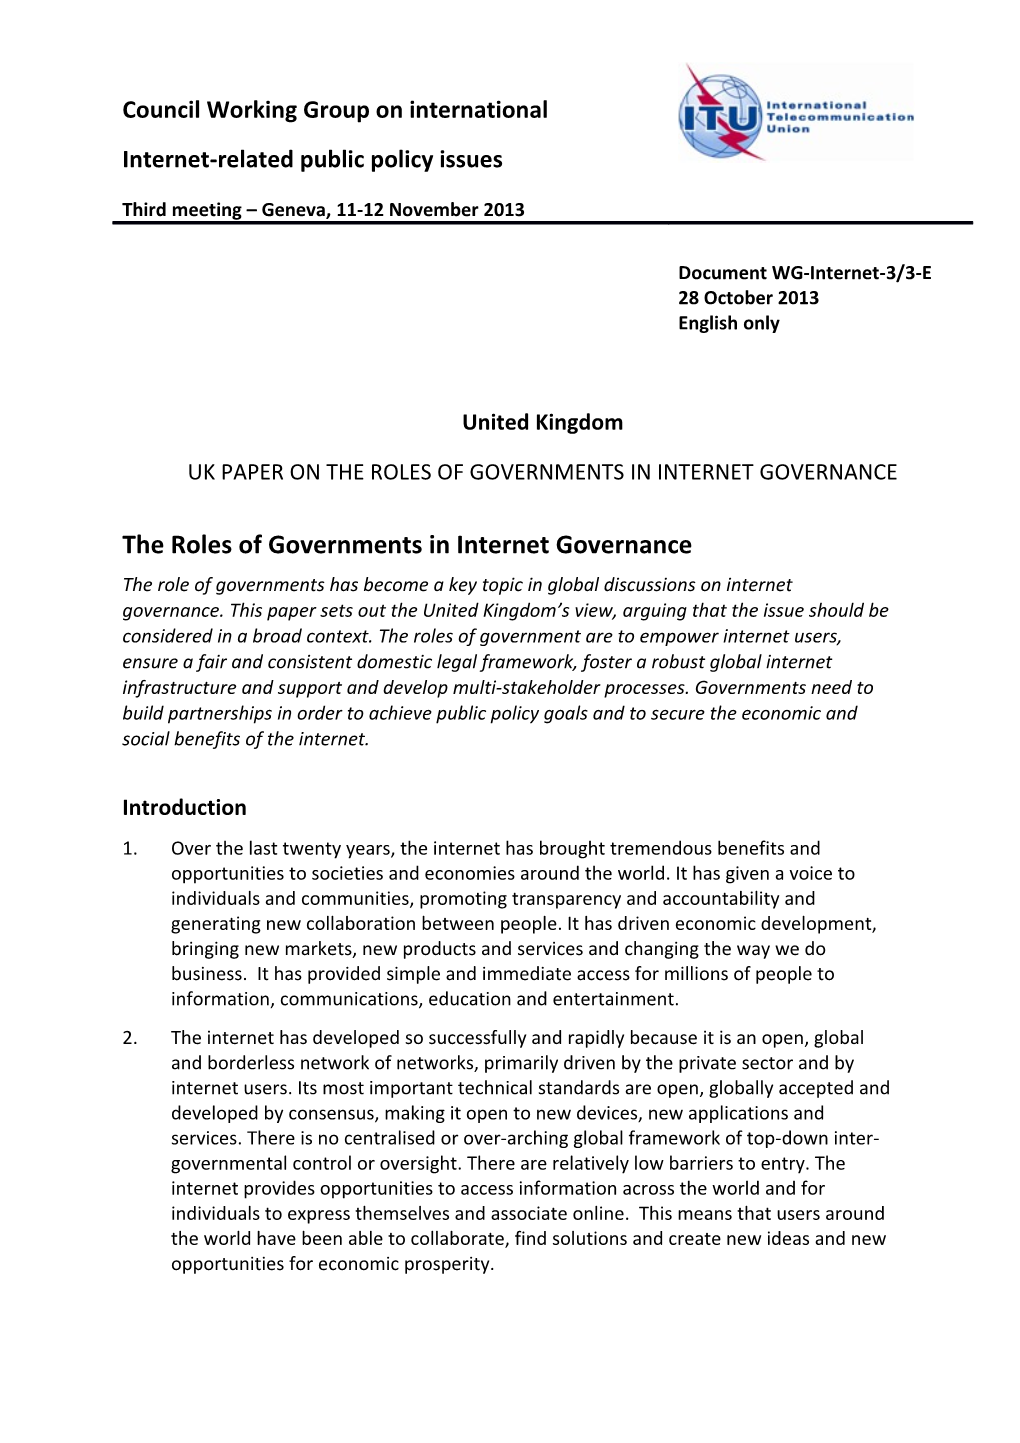 The Roles of Governments in Internet Governance